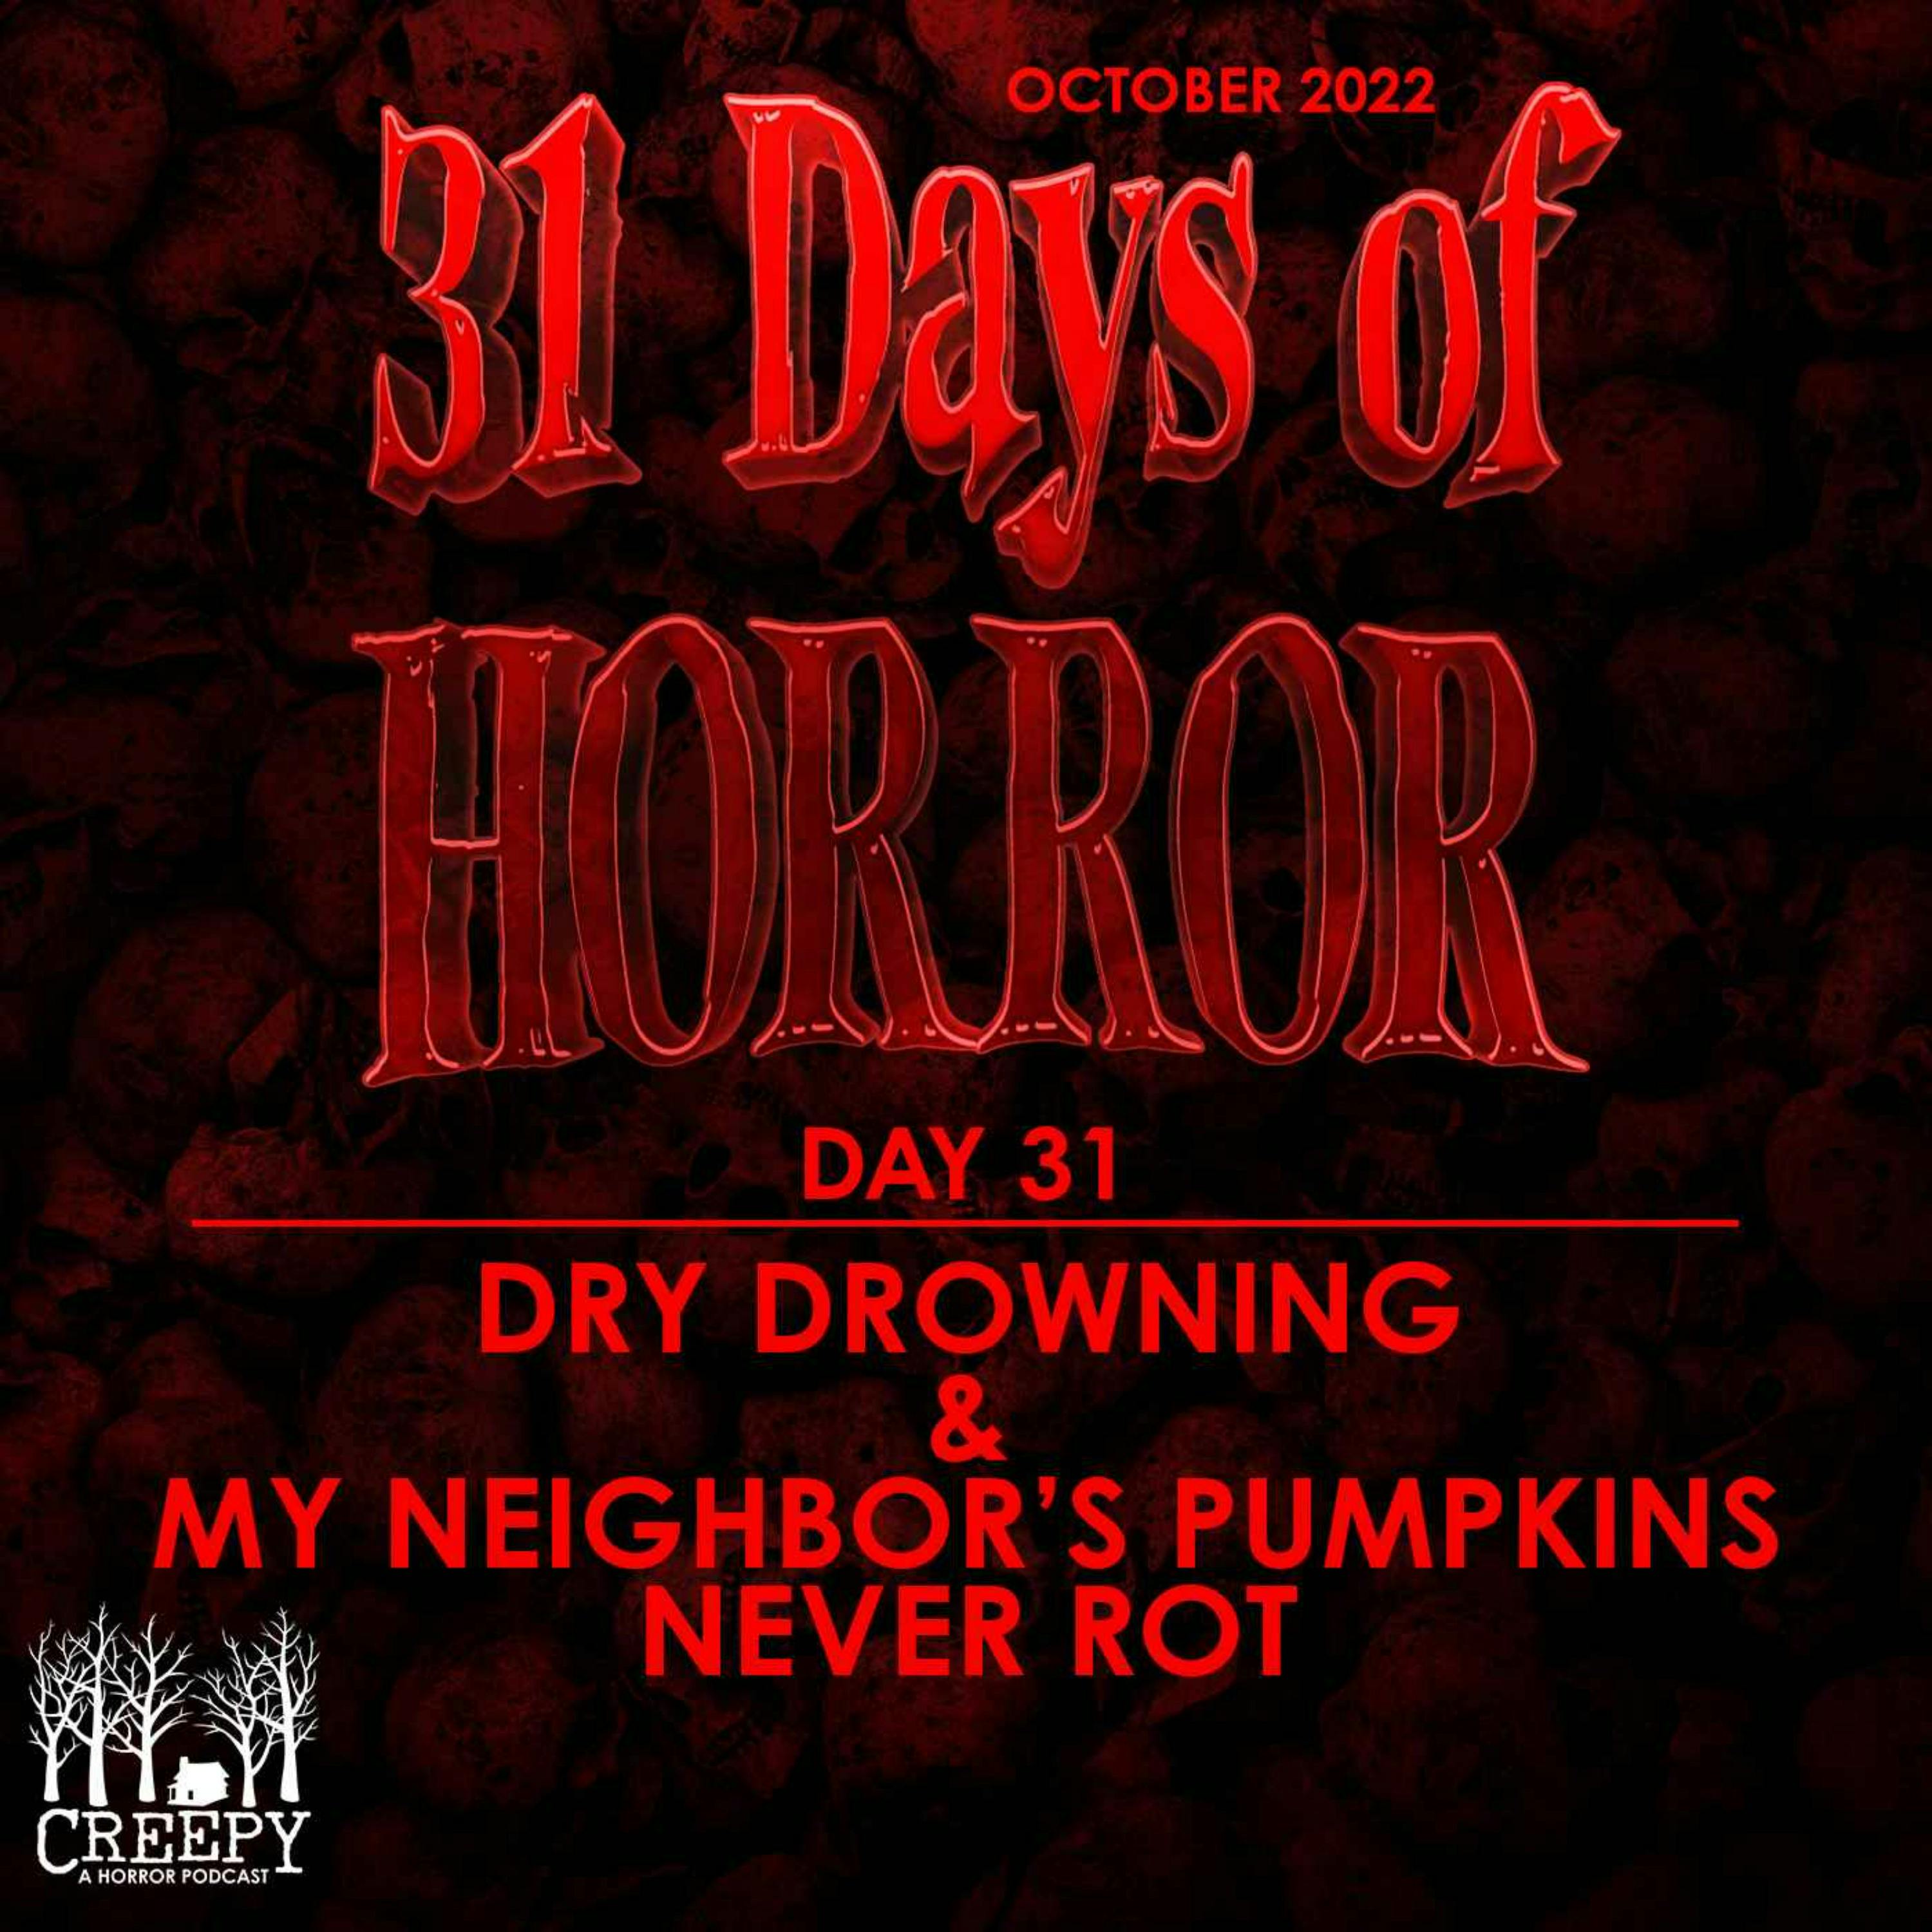 Day 31 - Dry Drowning & My Neighbor’s Pumpkins Never Rot